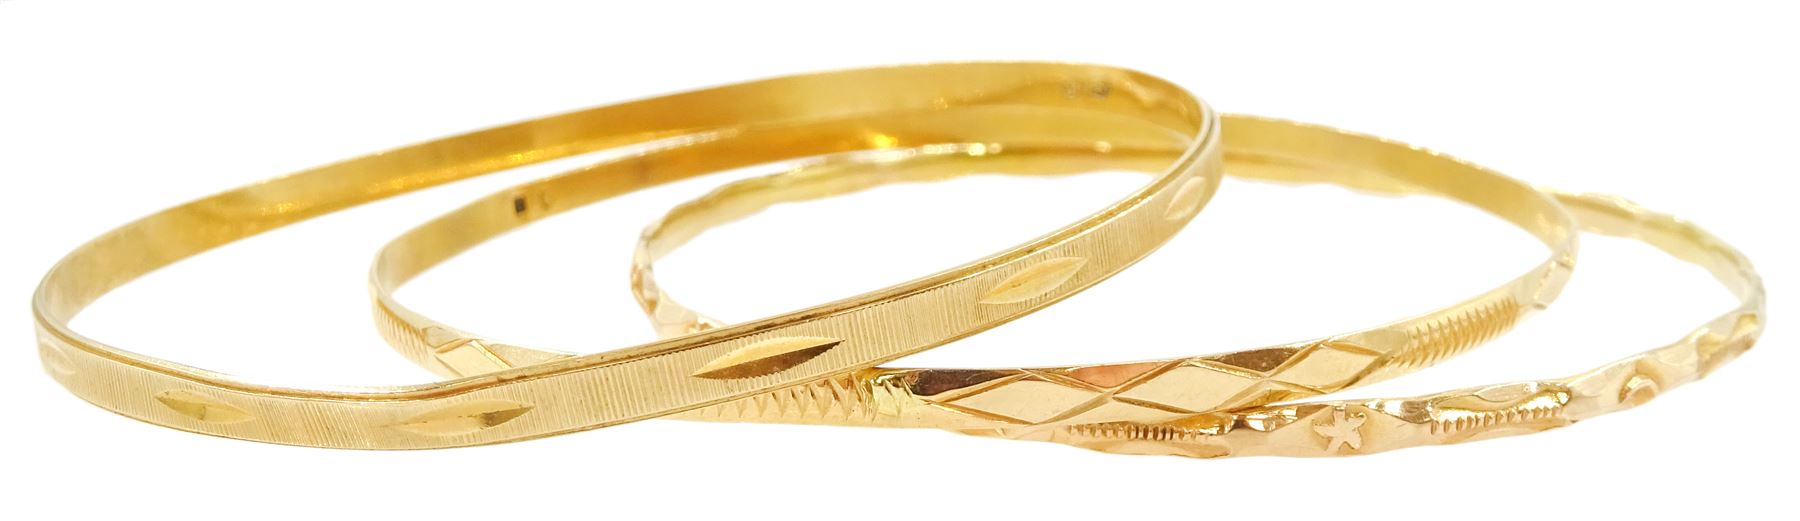 Three Middle Eastern gold bangles